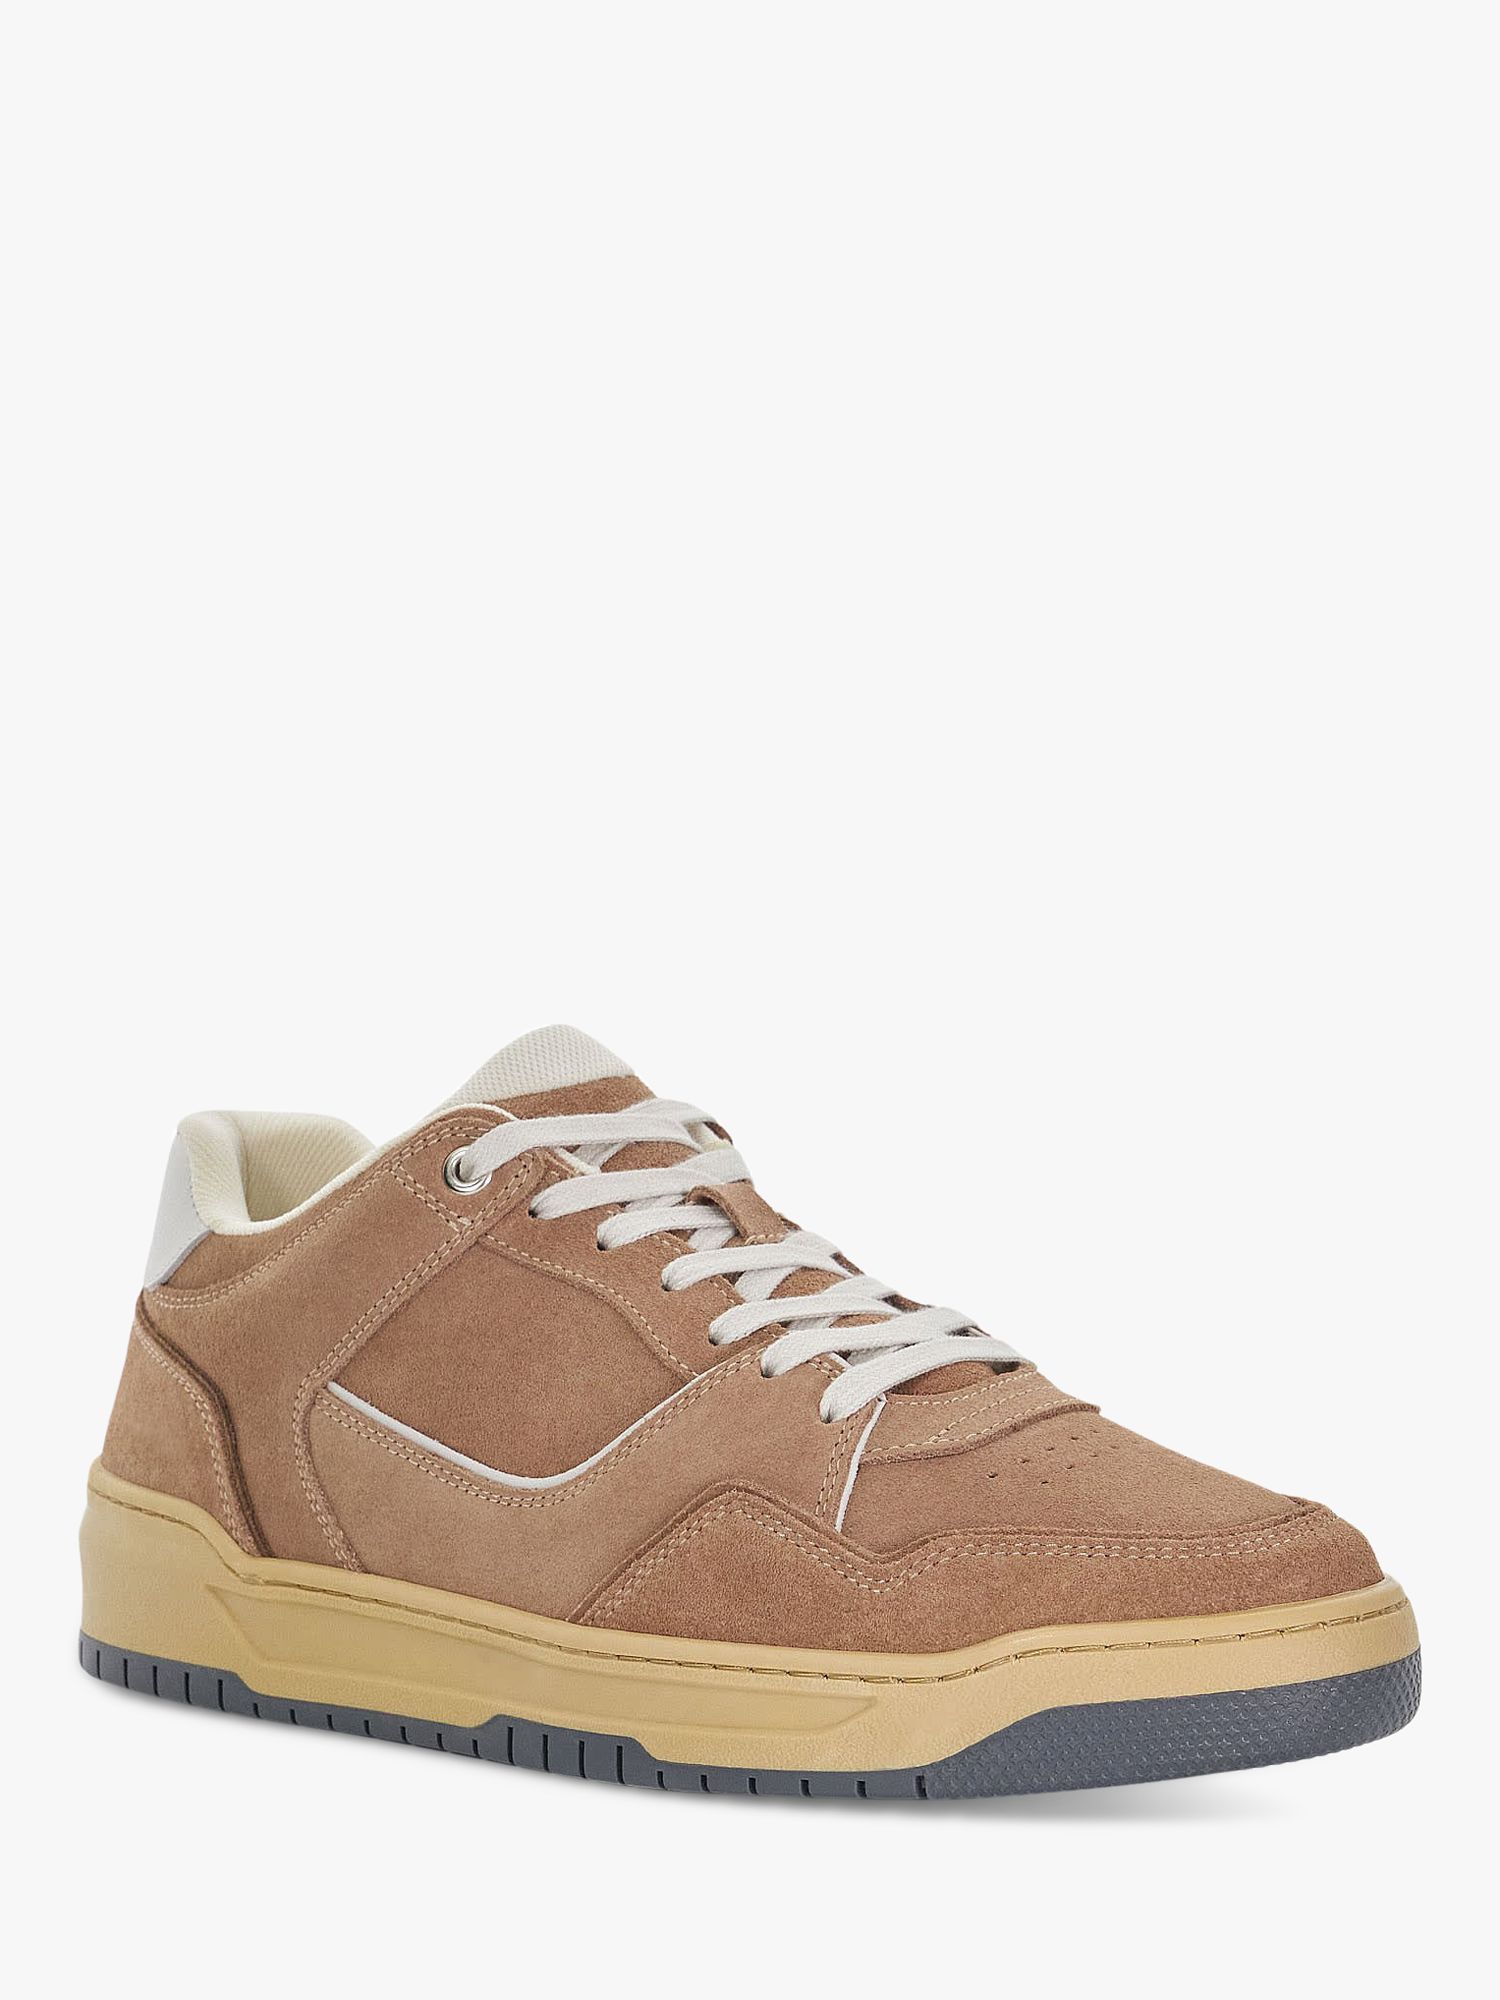 Buy Dune Tainted Suede Trainers, Beige Online at johnlewis.com